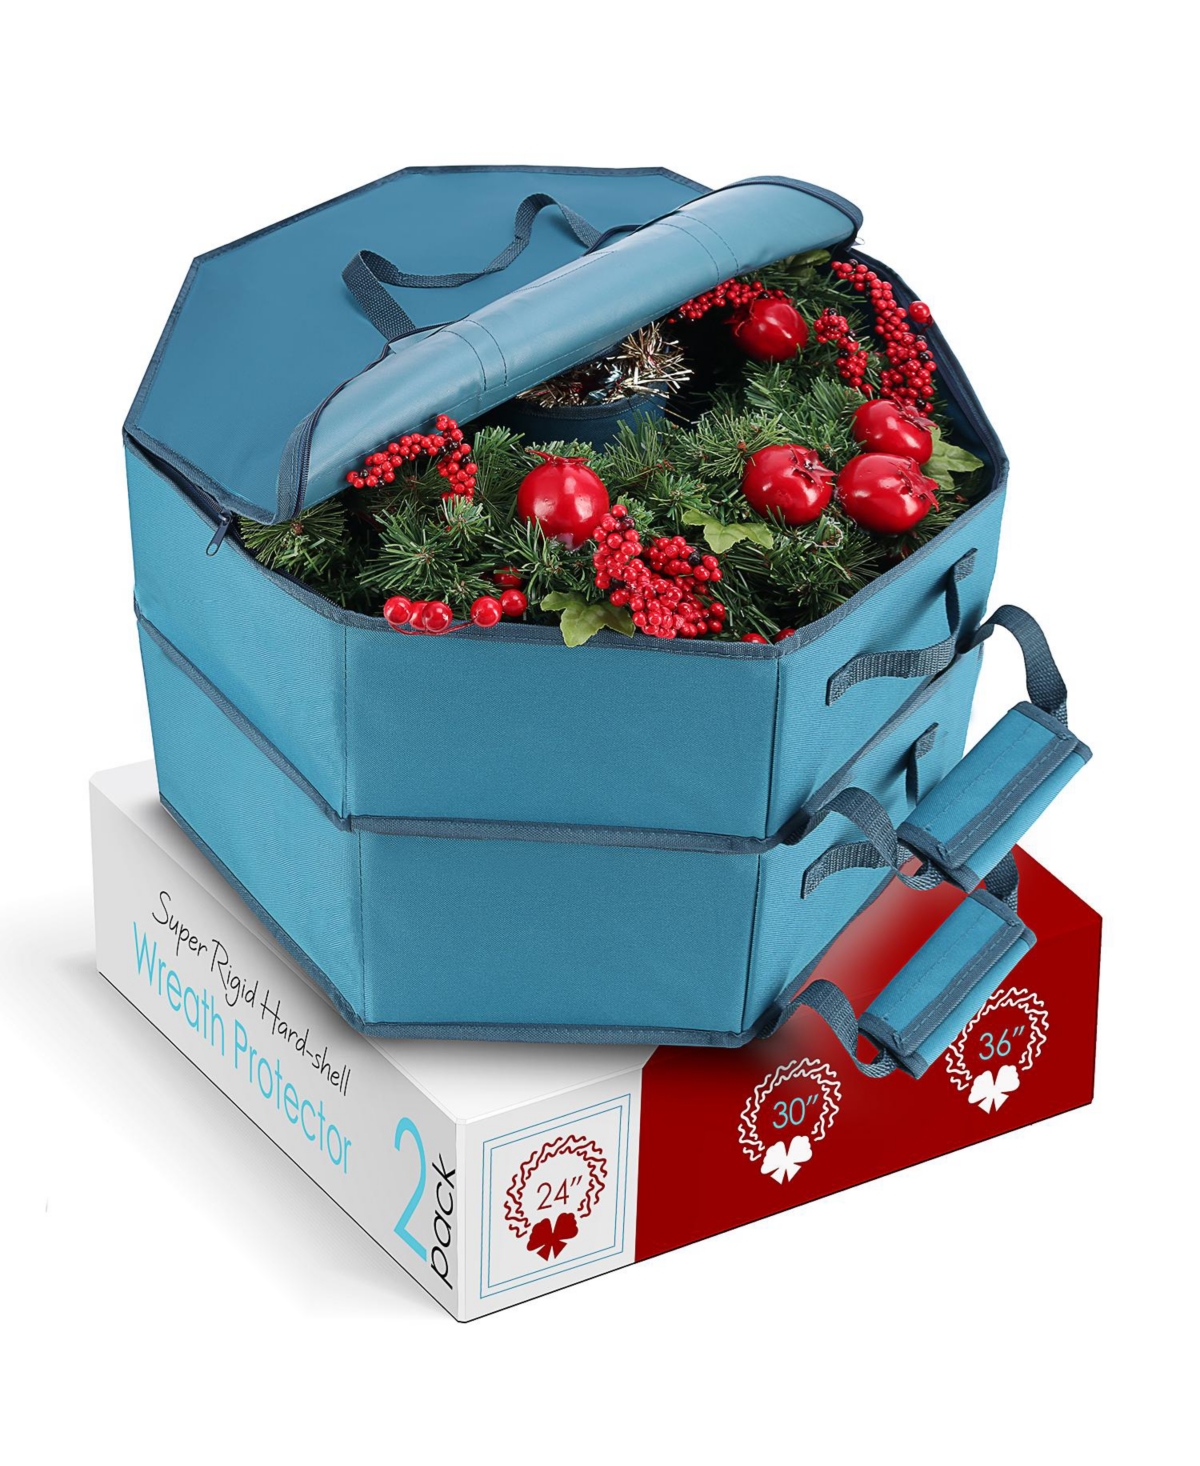 Premium Hard Shell Wreath Storage Bag with Interior Pockets, Dual Zipper and Handles - 24 Inch - 2 Pack - Blue